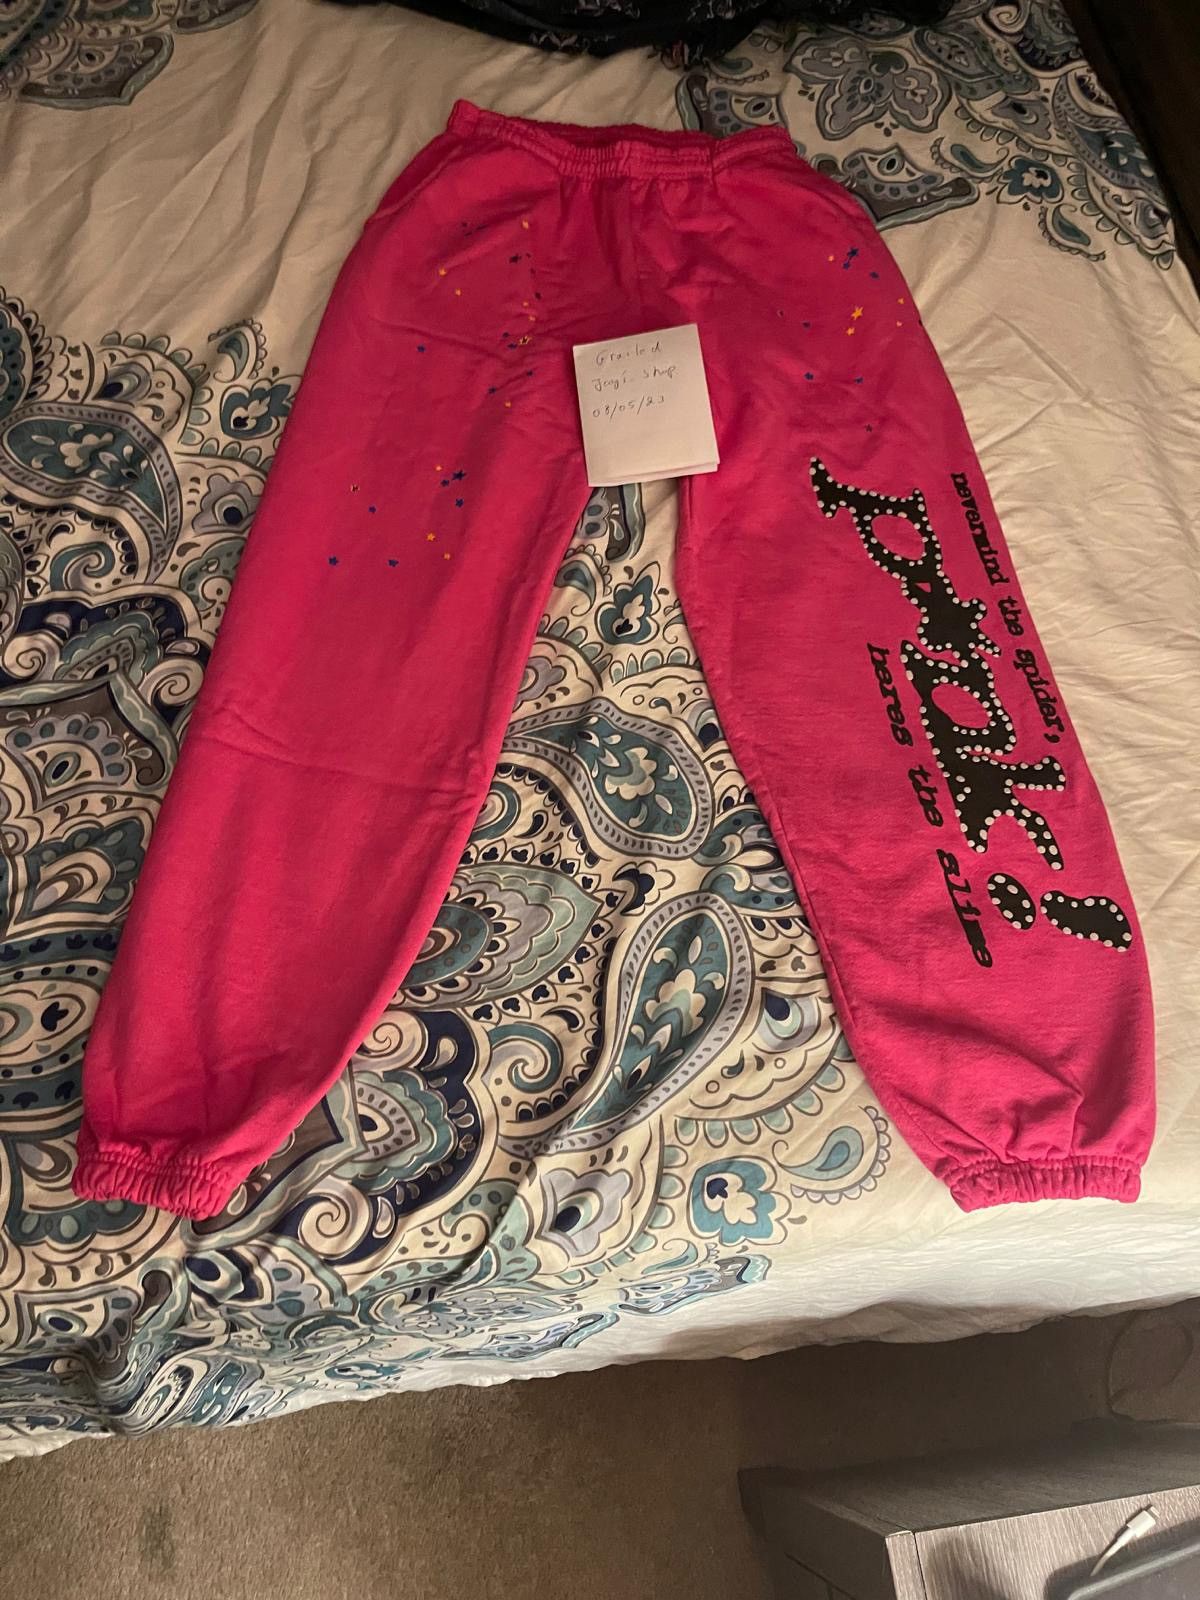 Young Thug Sp5der pink sweatpants size large | Grailed